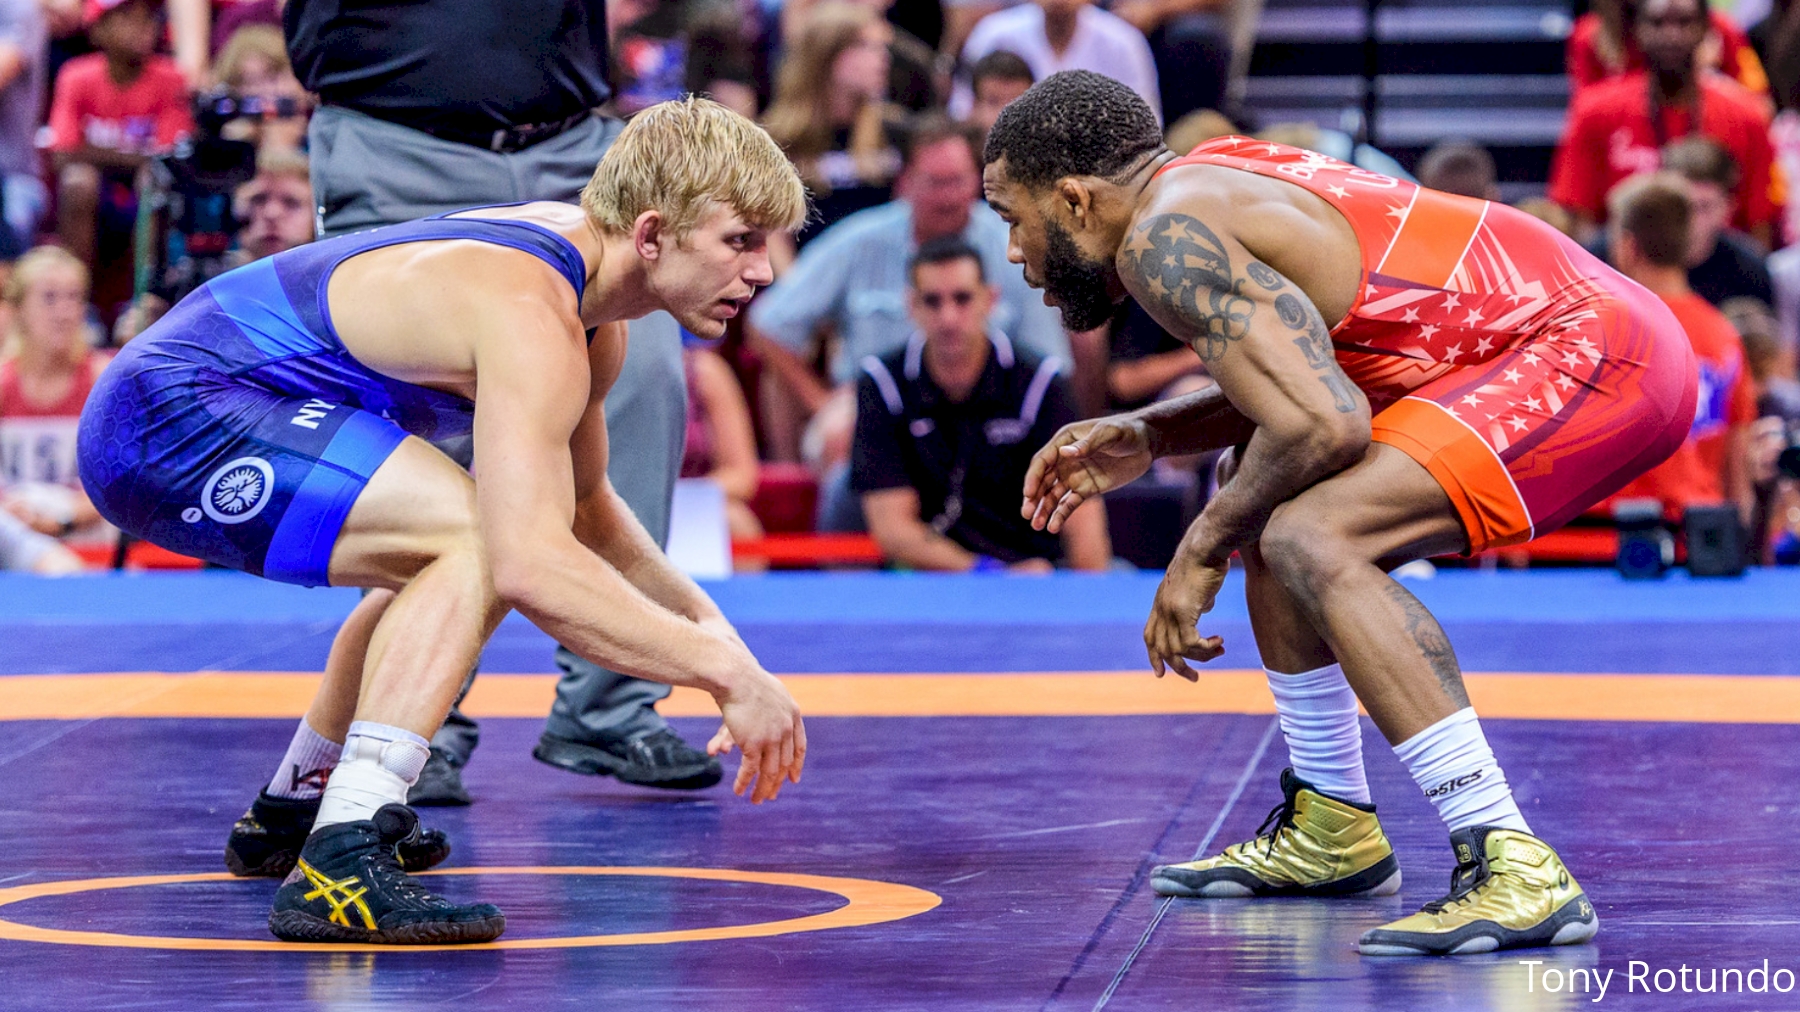 2021 USA Wrestling Olympic Team Trials Watch Party Wrestling Event